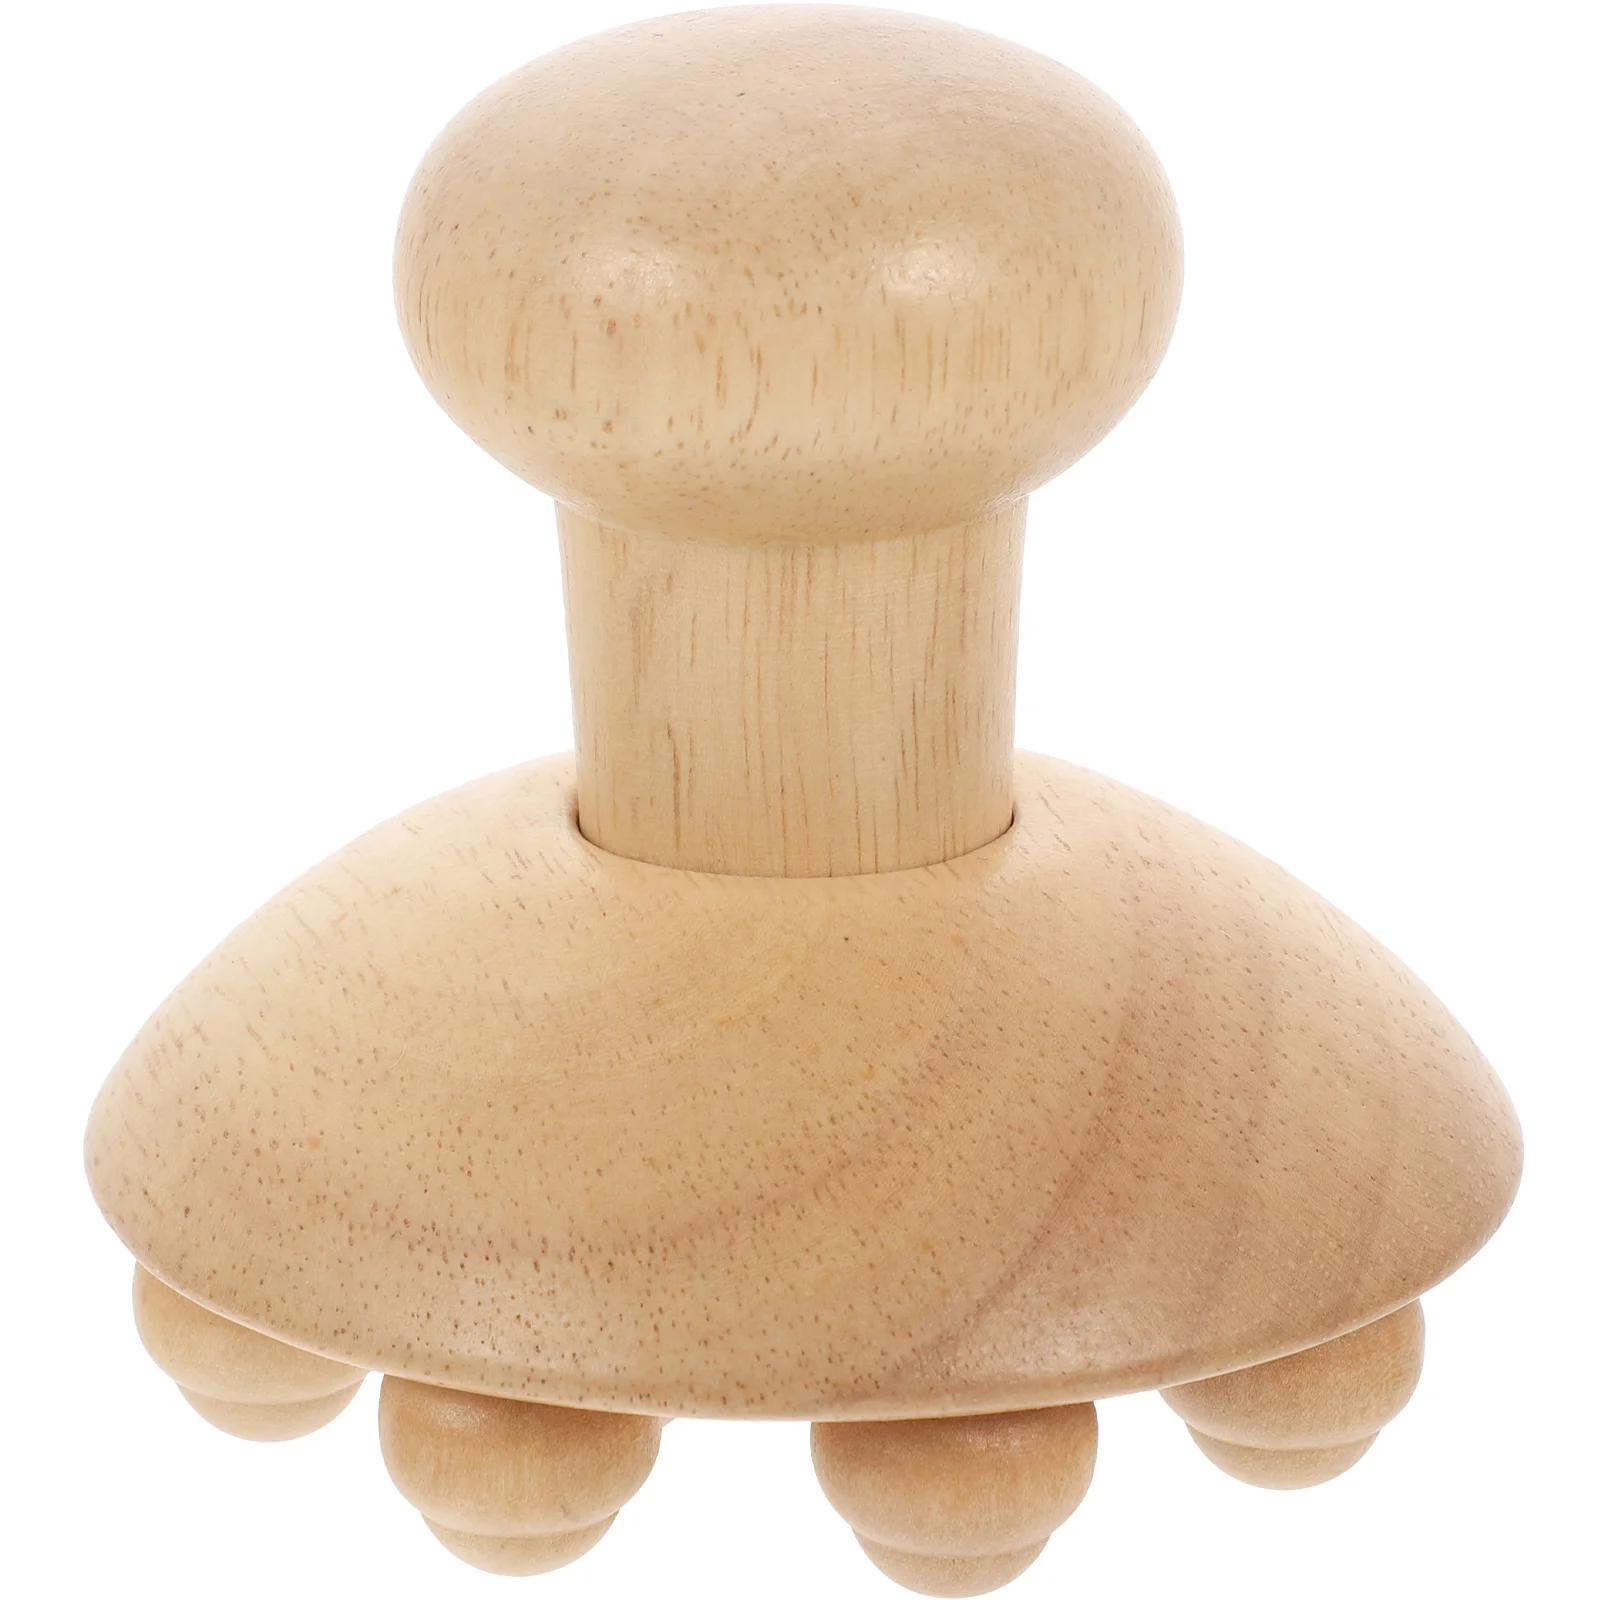 

Cupping Massage Body Acupoint Household Guasha Roller Massaging Relax Portable Wooden Practical